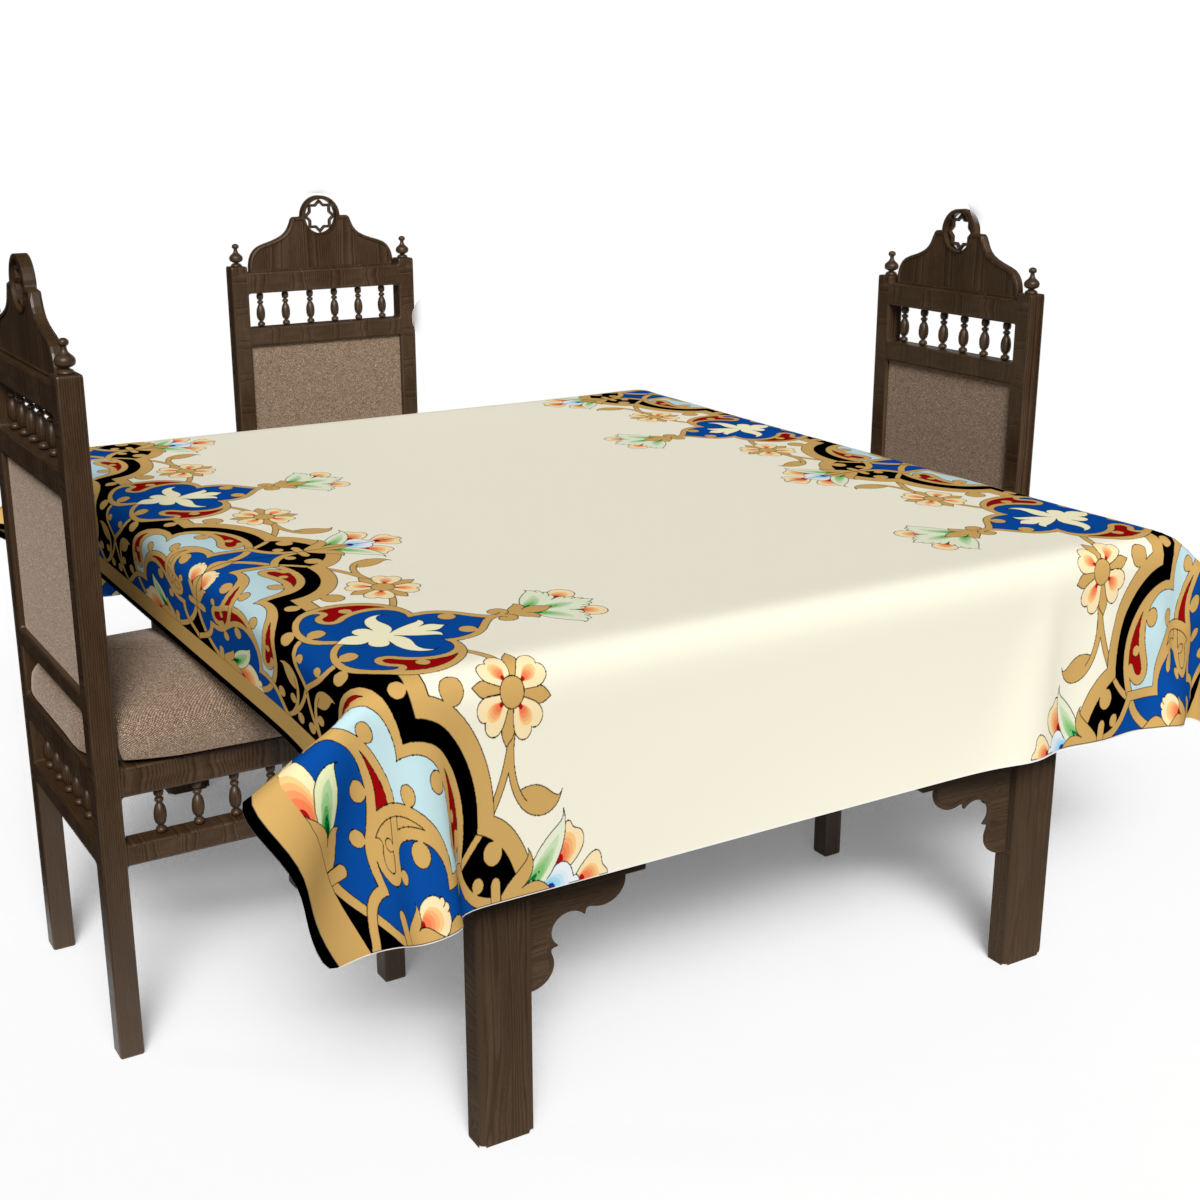 Table cloth - multiple sizes - ROM561